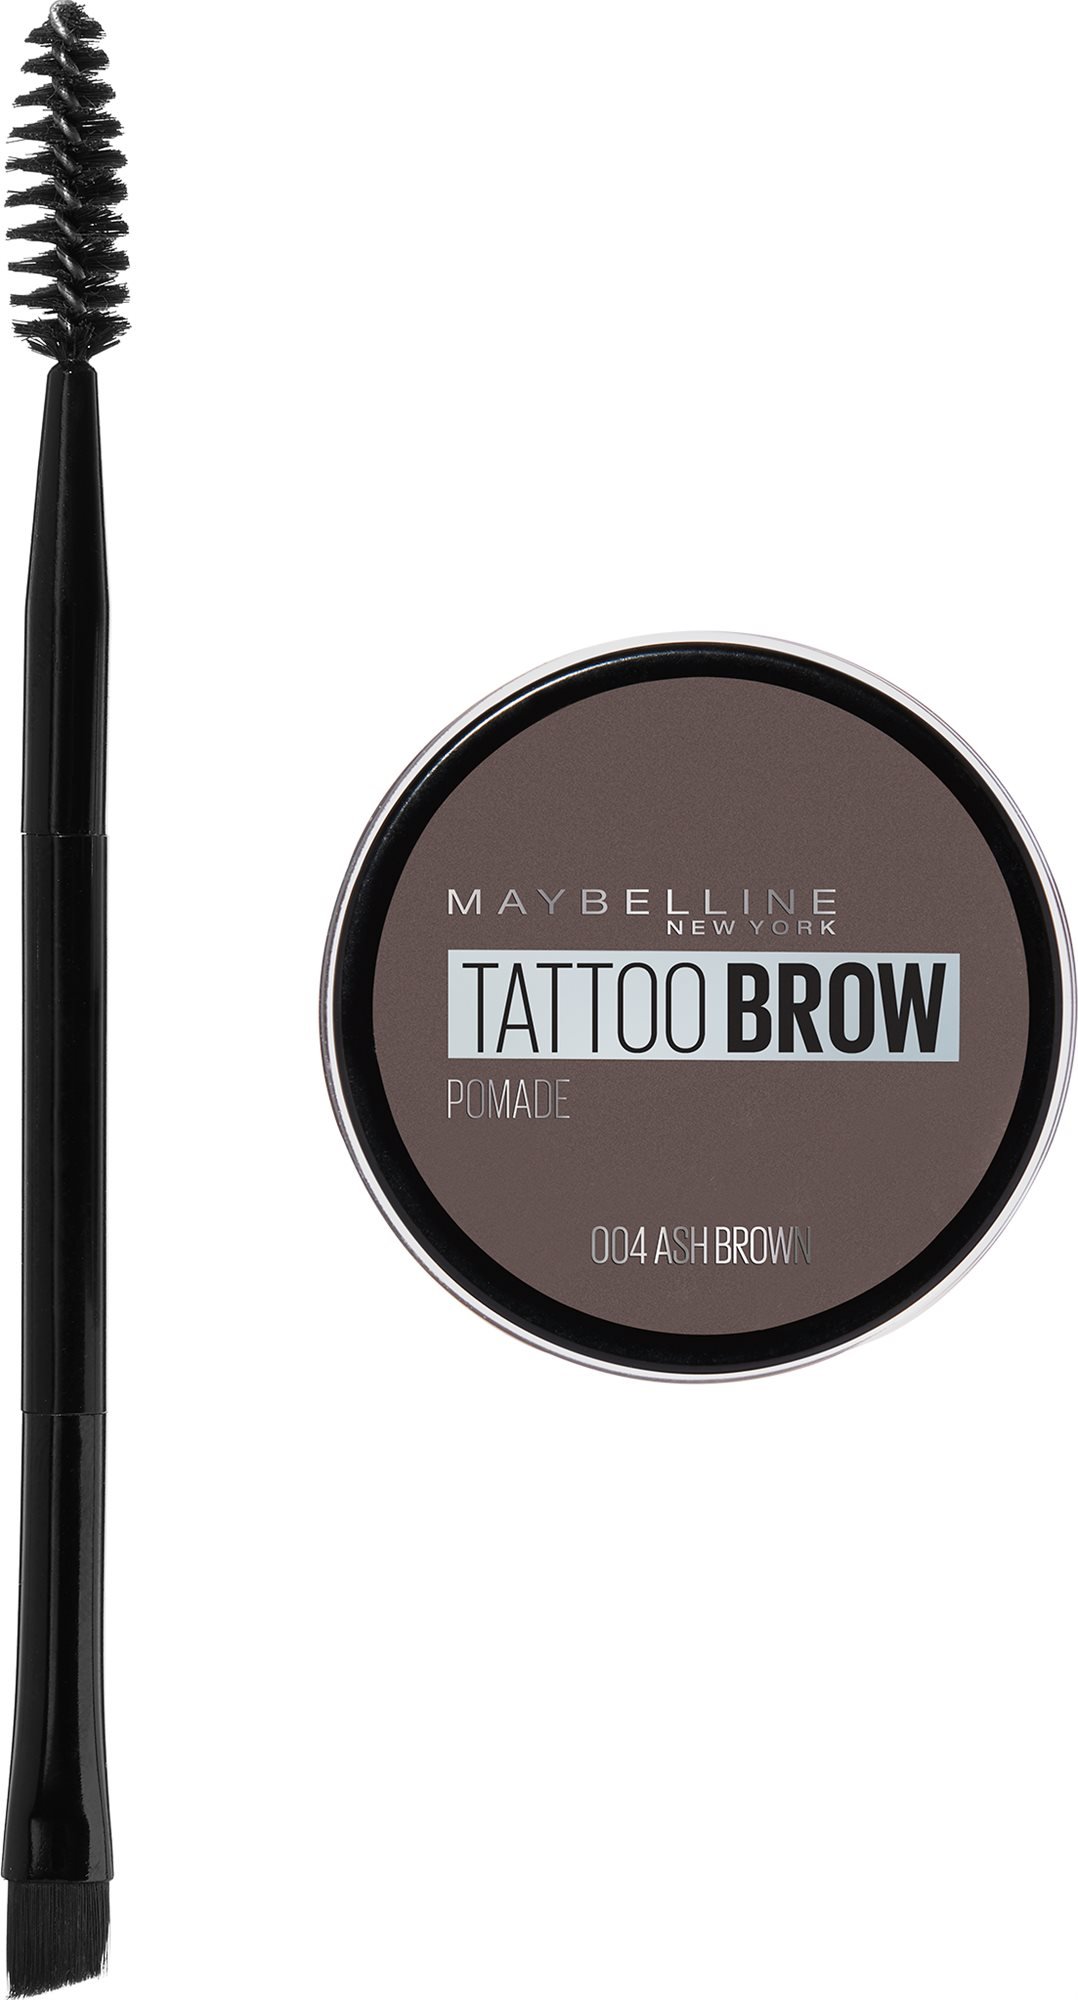 MAYBELLINE TATTOO BROW PEEL OFF TINT REVIEW - TrinaDuhra - YouTube